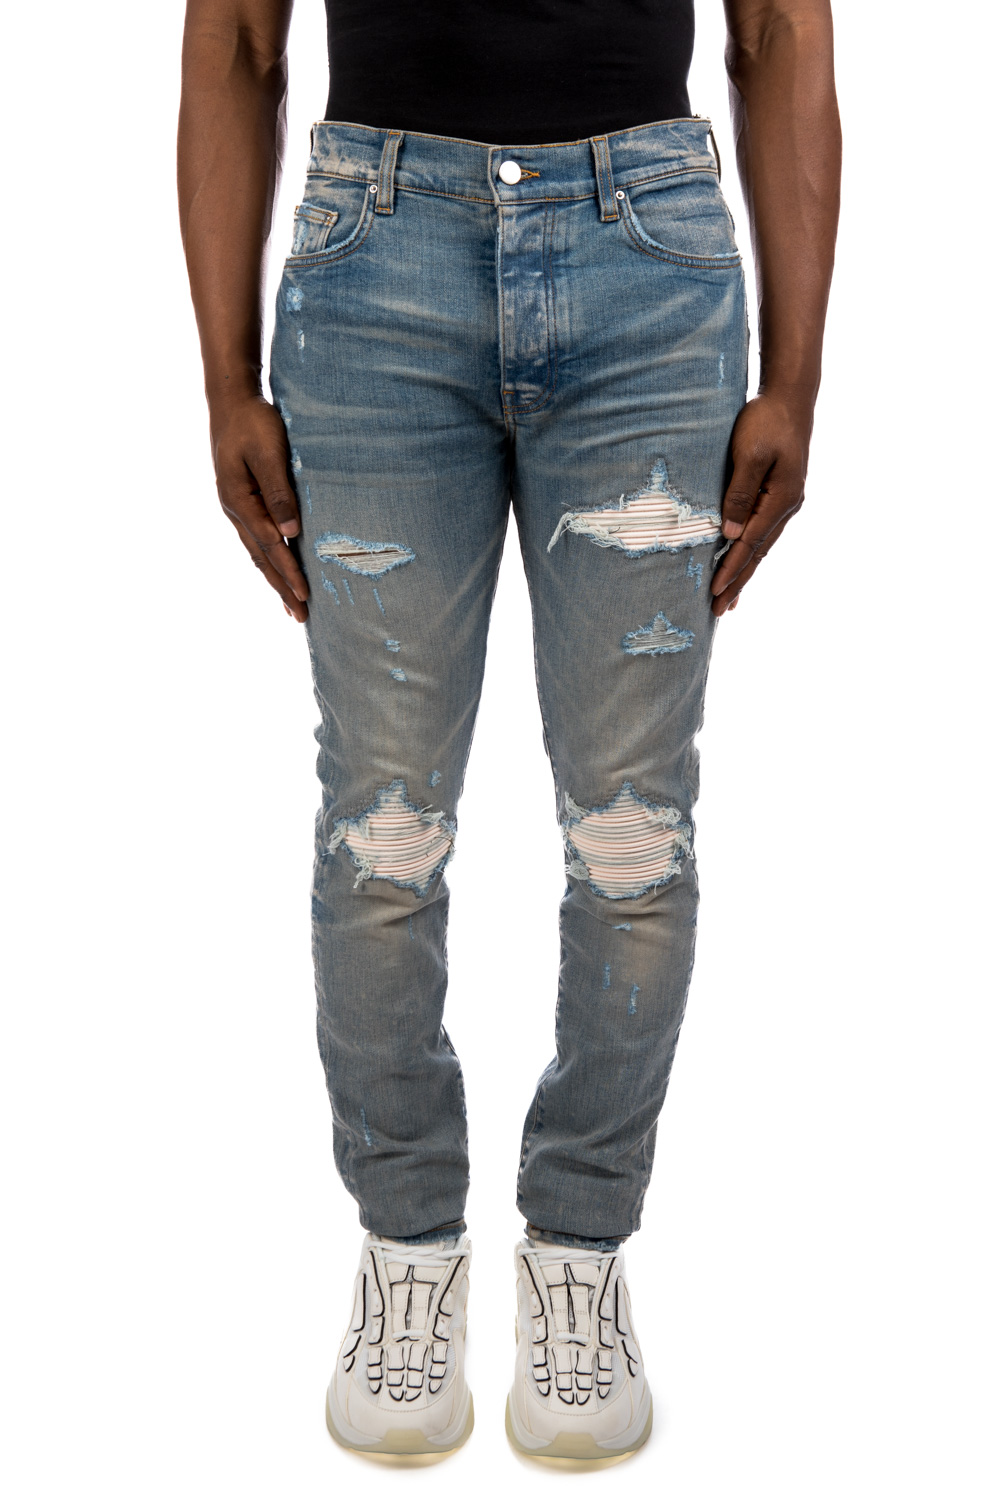 Amiri MX1 Ultra suede-patches Skinny Jeans - Blue